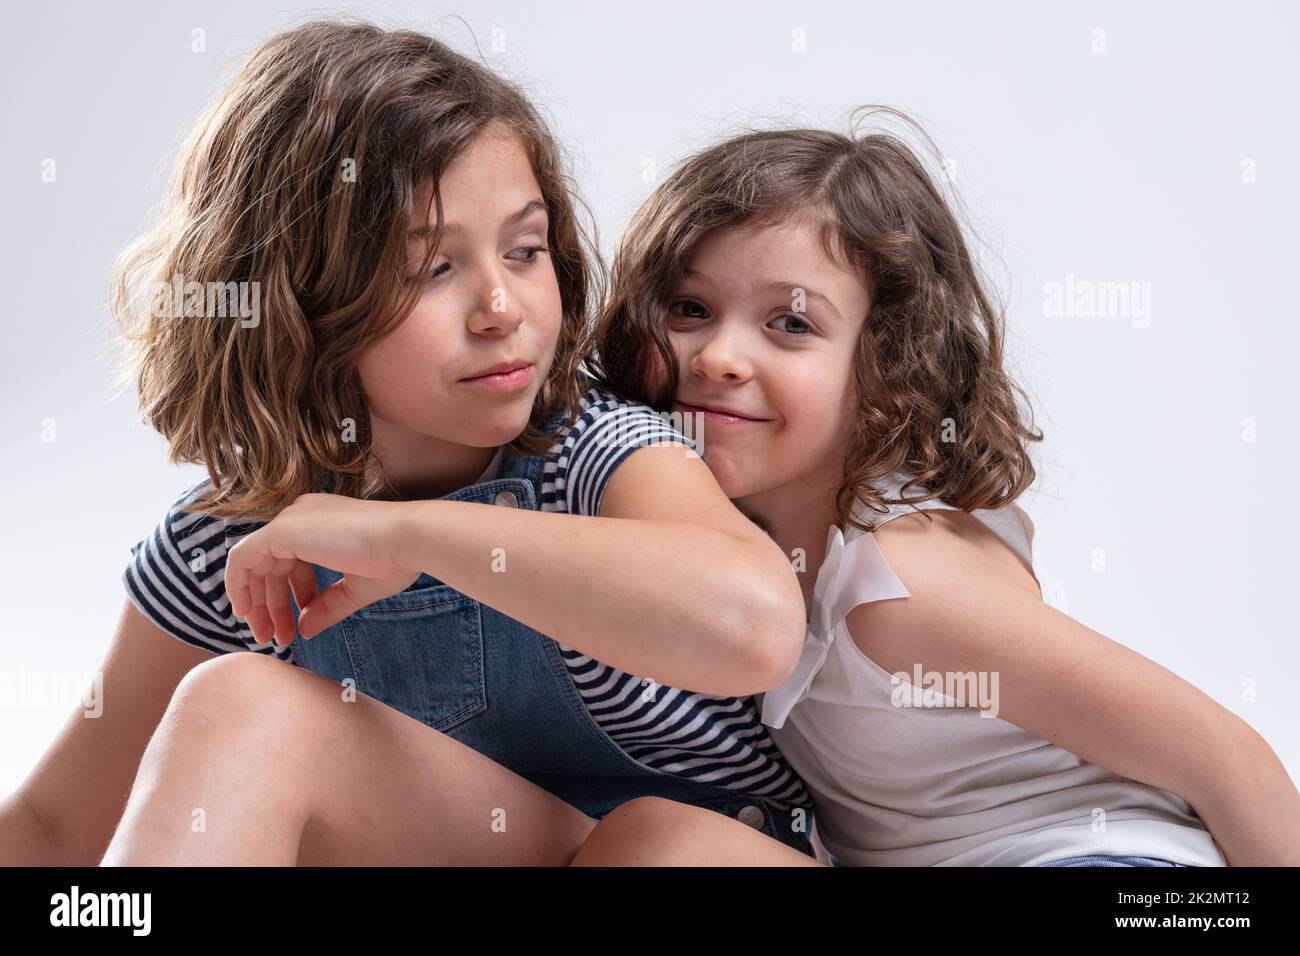 Two attractive young sisters cuddling together Stock Photo